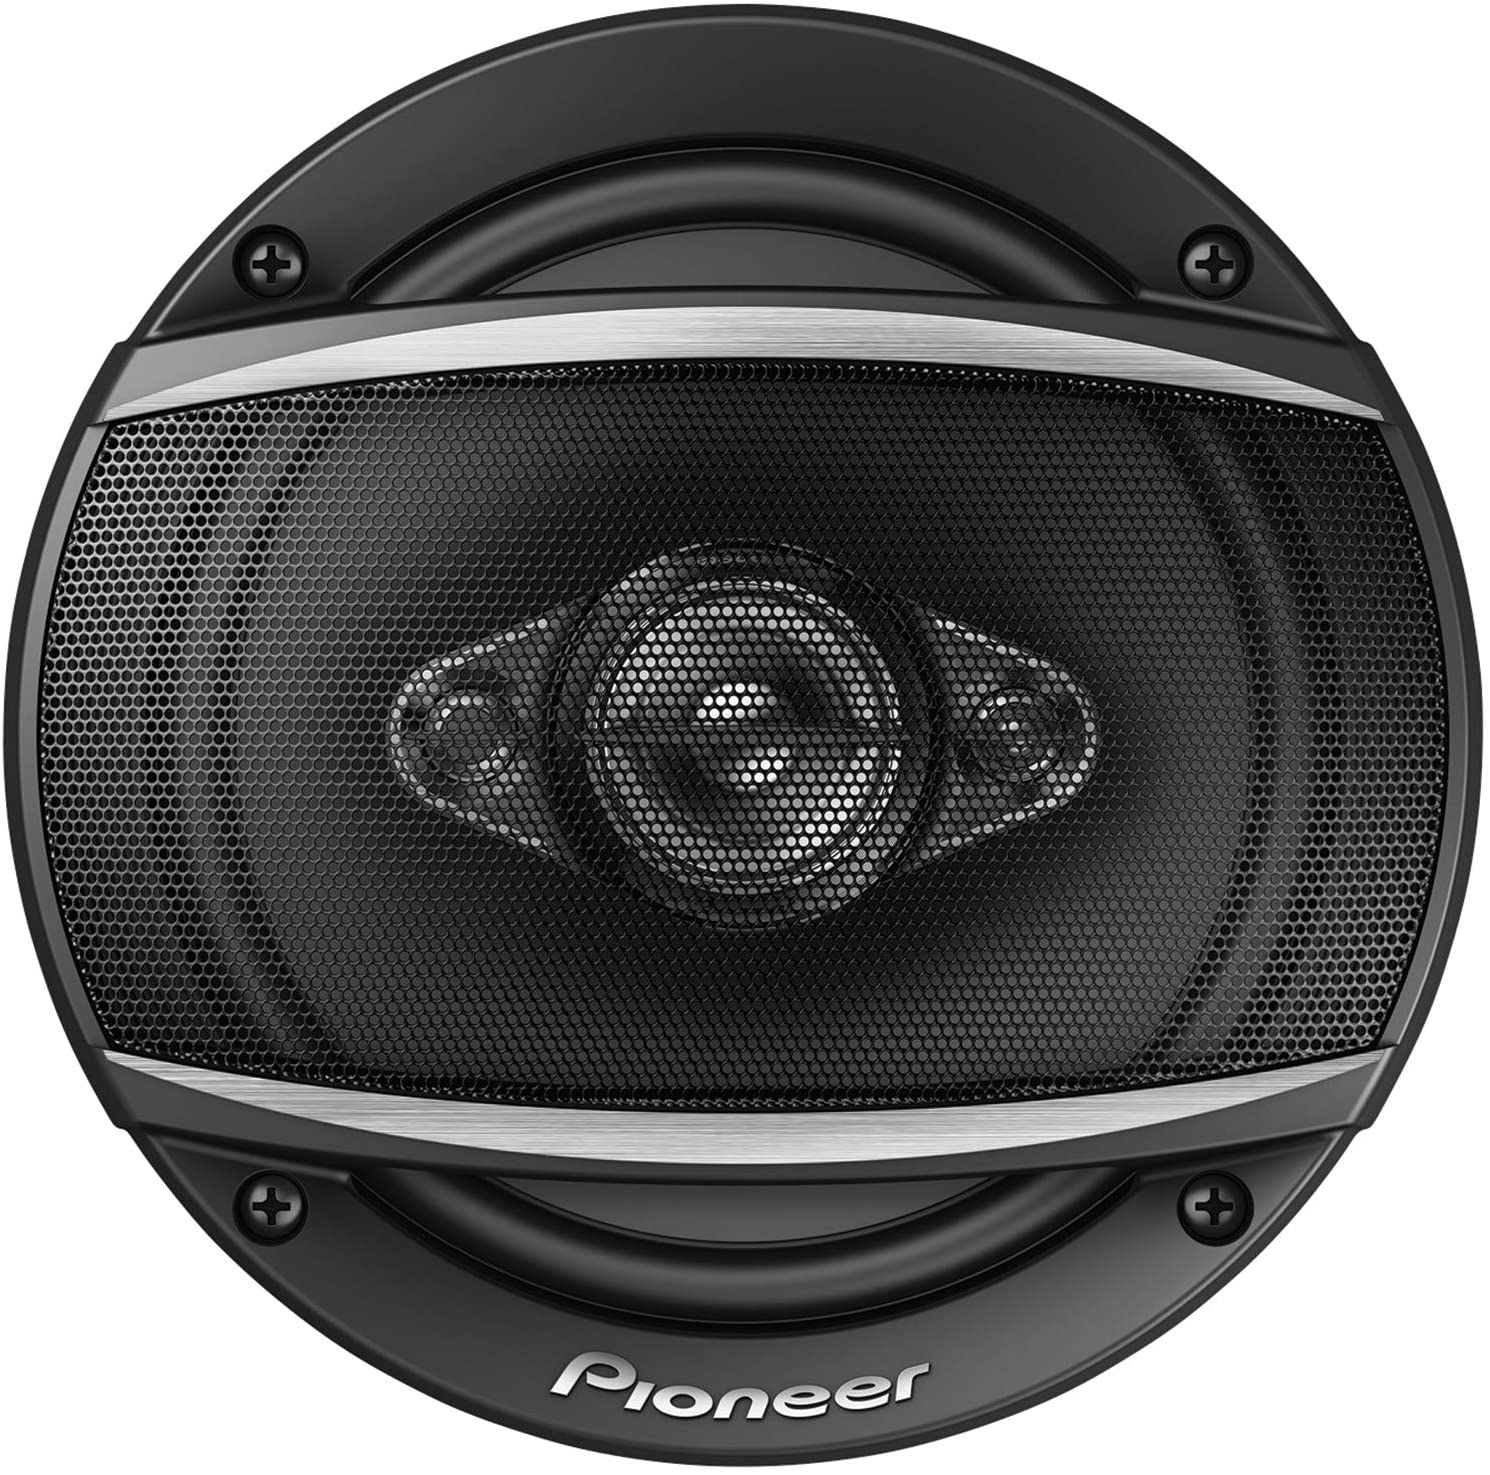 Best Car Speakers for Sound Quality and Bass Pioneer TS-A1680F A-Series 4-Way Car Speakers